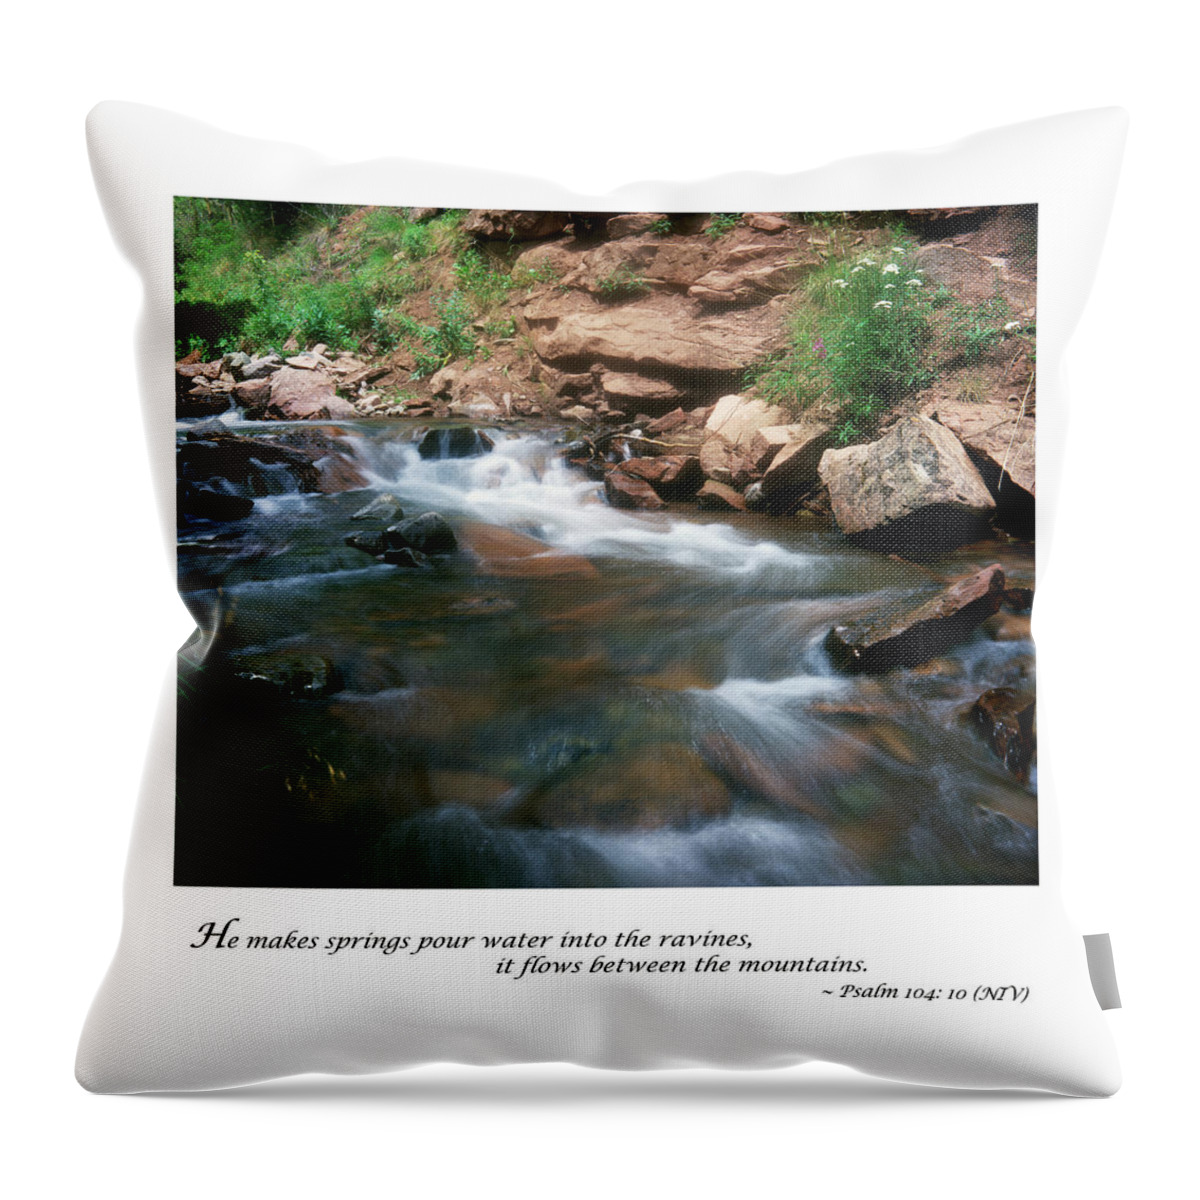 Richard E. Porter Throw Pillow featuring the photograph Angel Hair, Purgatory River-104th Psalm by Richard Porter